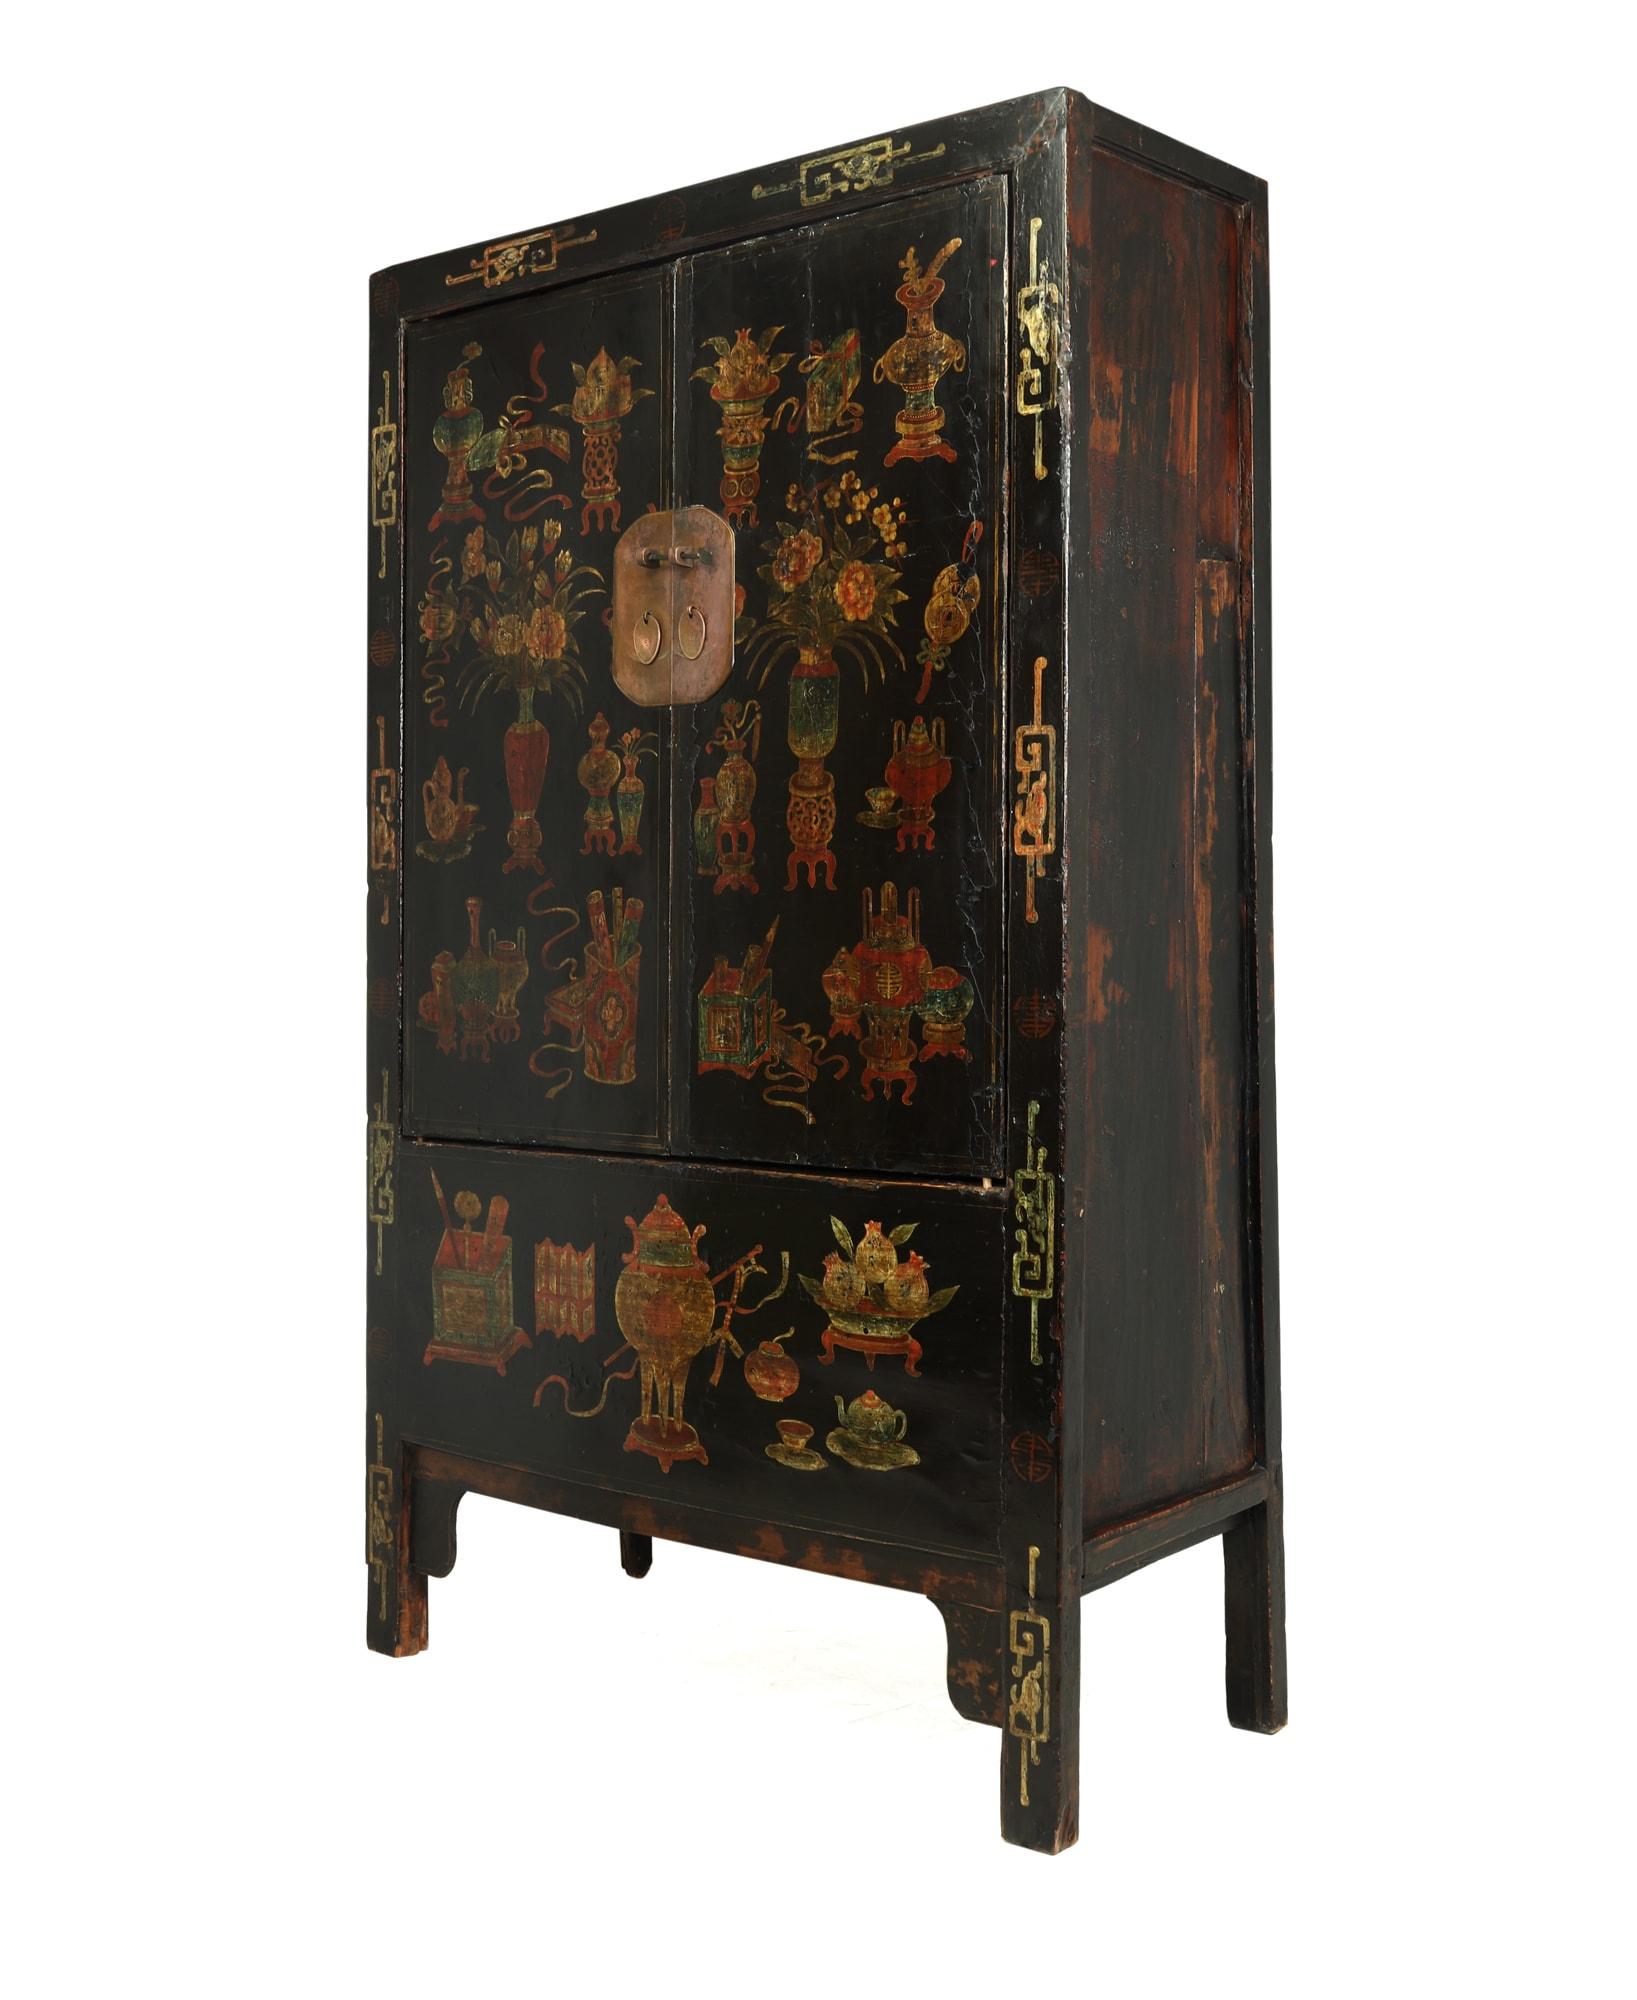 A Chinese solid elm cabinet with original lacquer produced in Northern China during the Quing Dynasty, this cabinet was usually bought as a gift for a newly married couple and lot were restored and exported to Europe from china in the 1980’s amongst